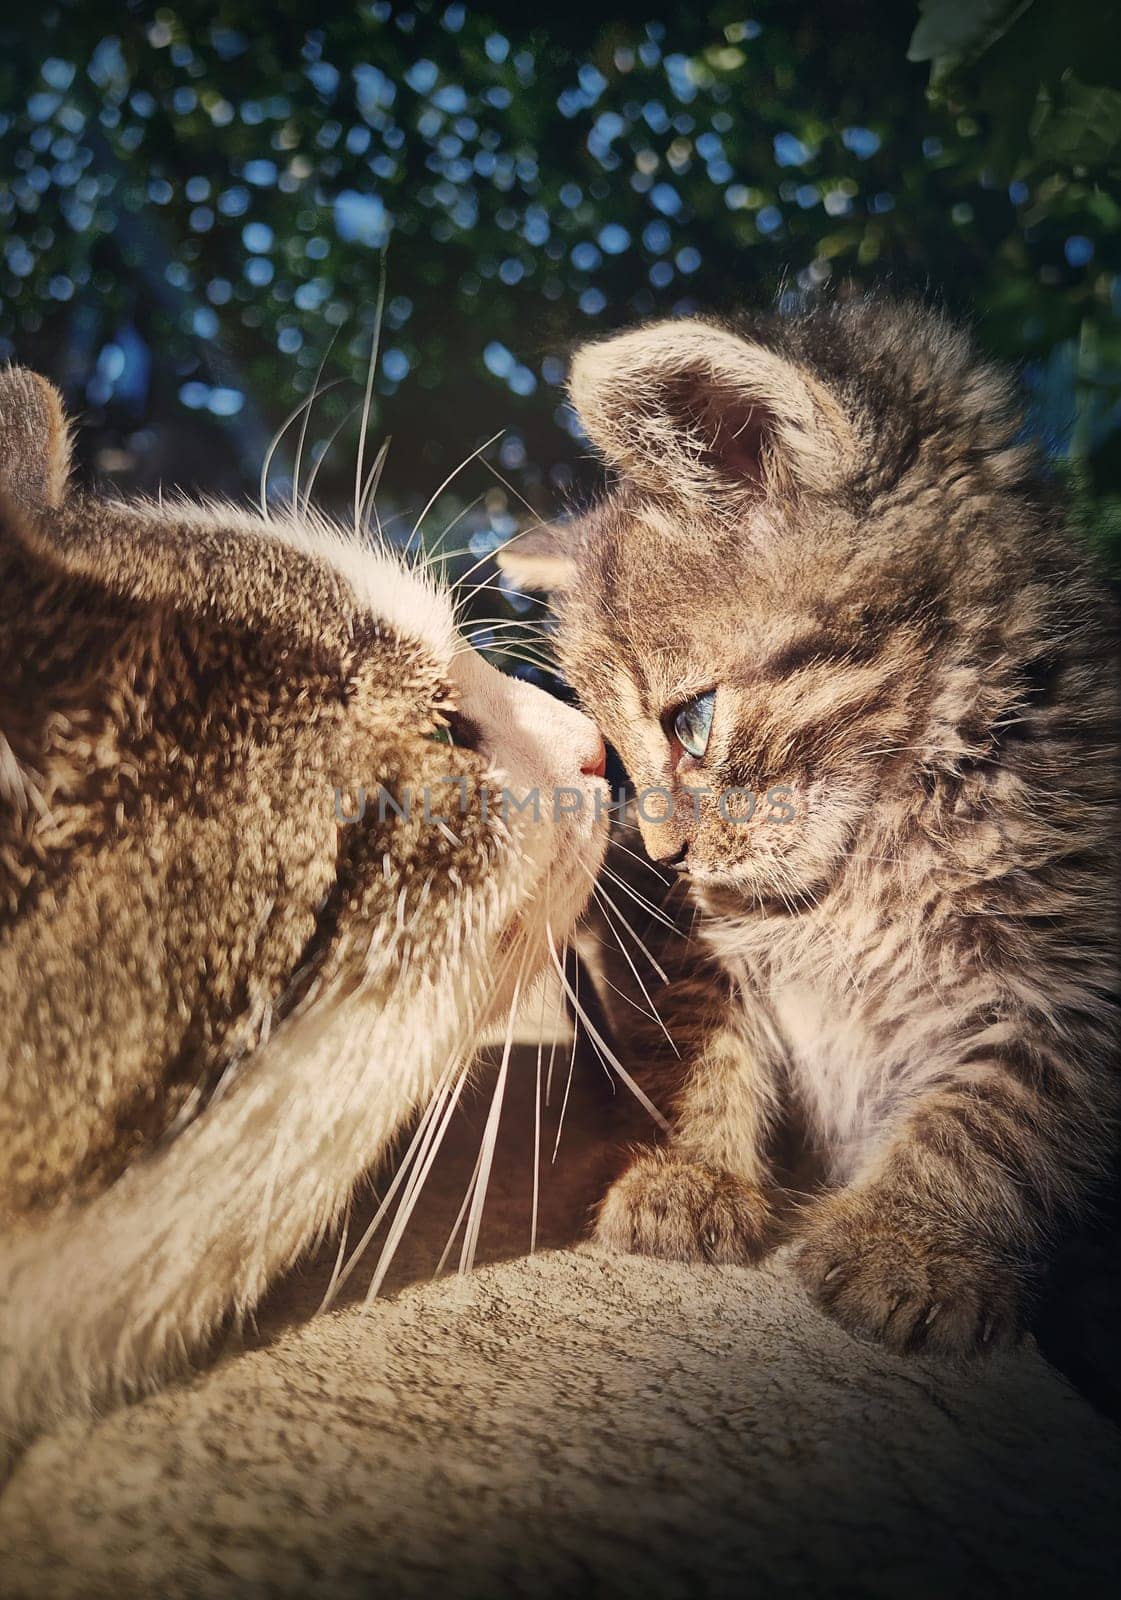 The adult tomcat meets a small baby kitten, making acquaintance as looks in the eyes one another. Cute cats close up portrait